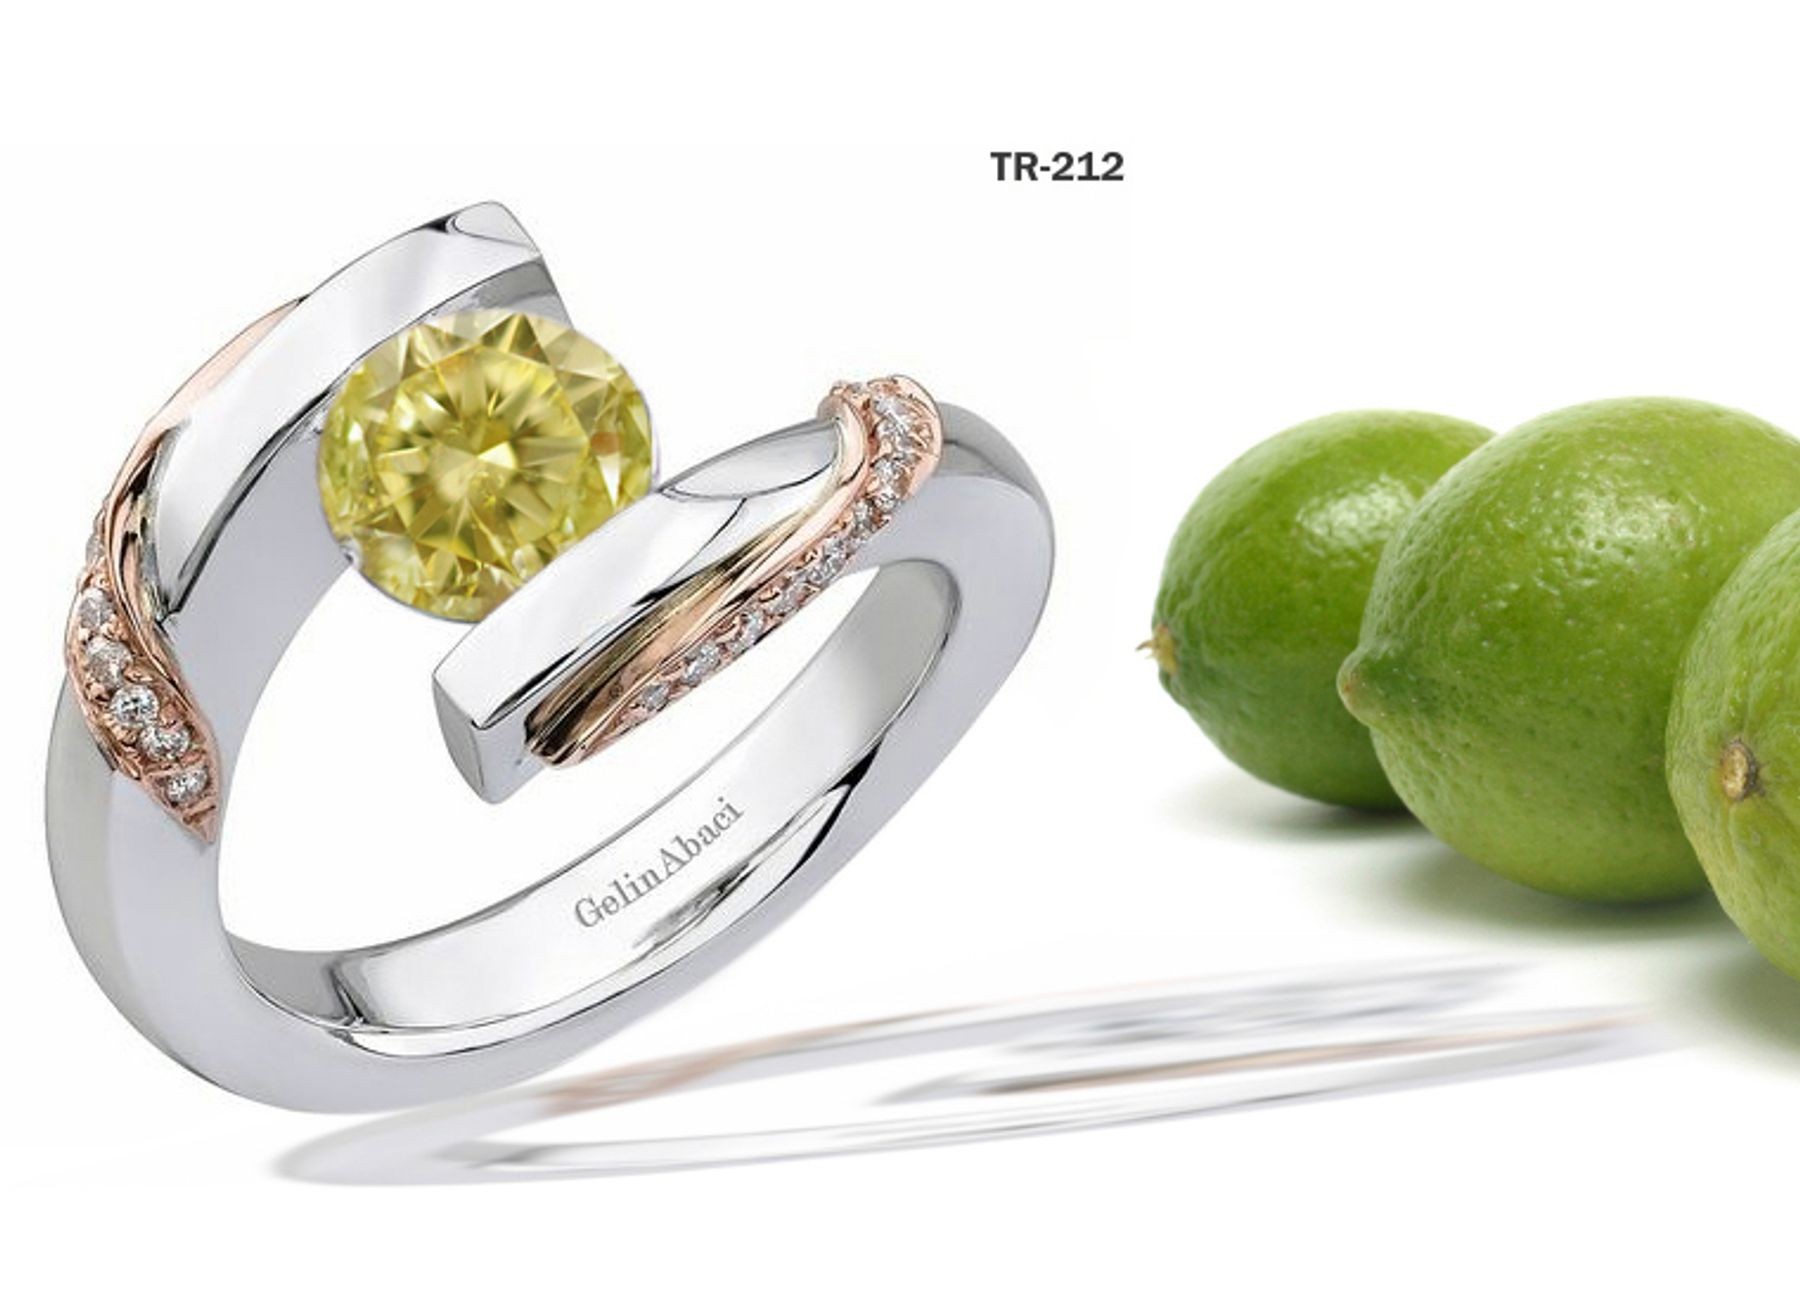 Platinum or Gold Fancy Color Yellow Diamond Tension Set Tension Set Engagement Rings